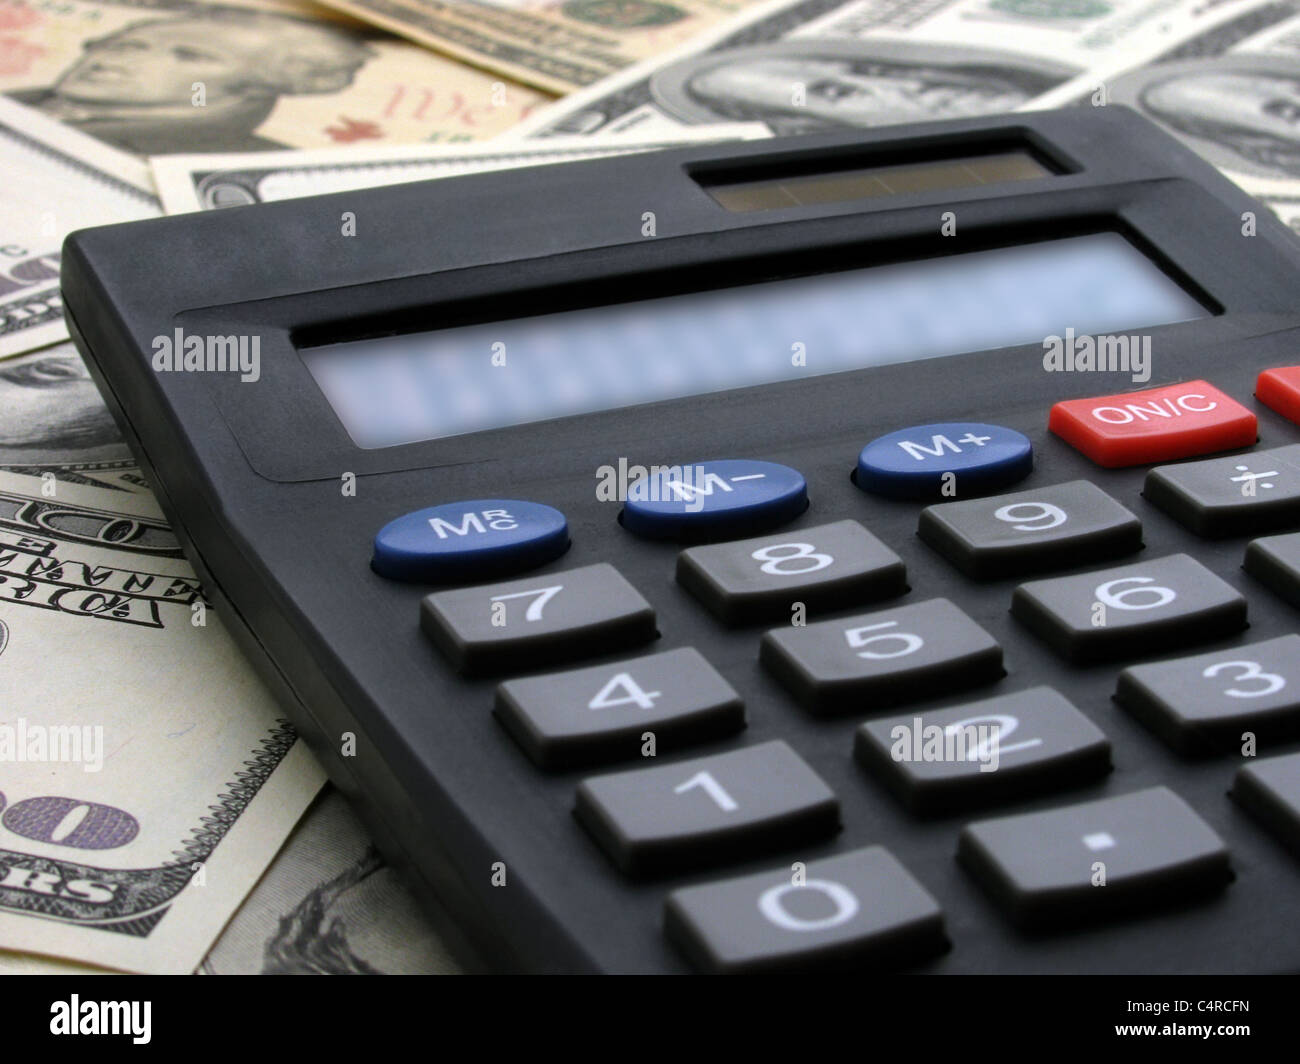 calculating income: calculator on heap of banknotes Stock Photo